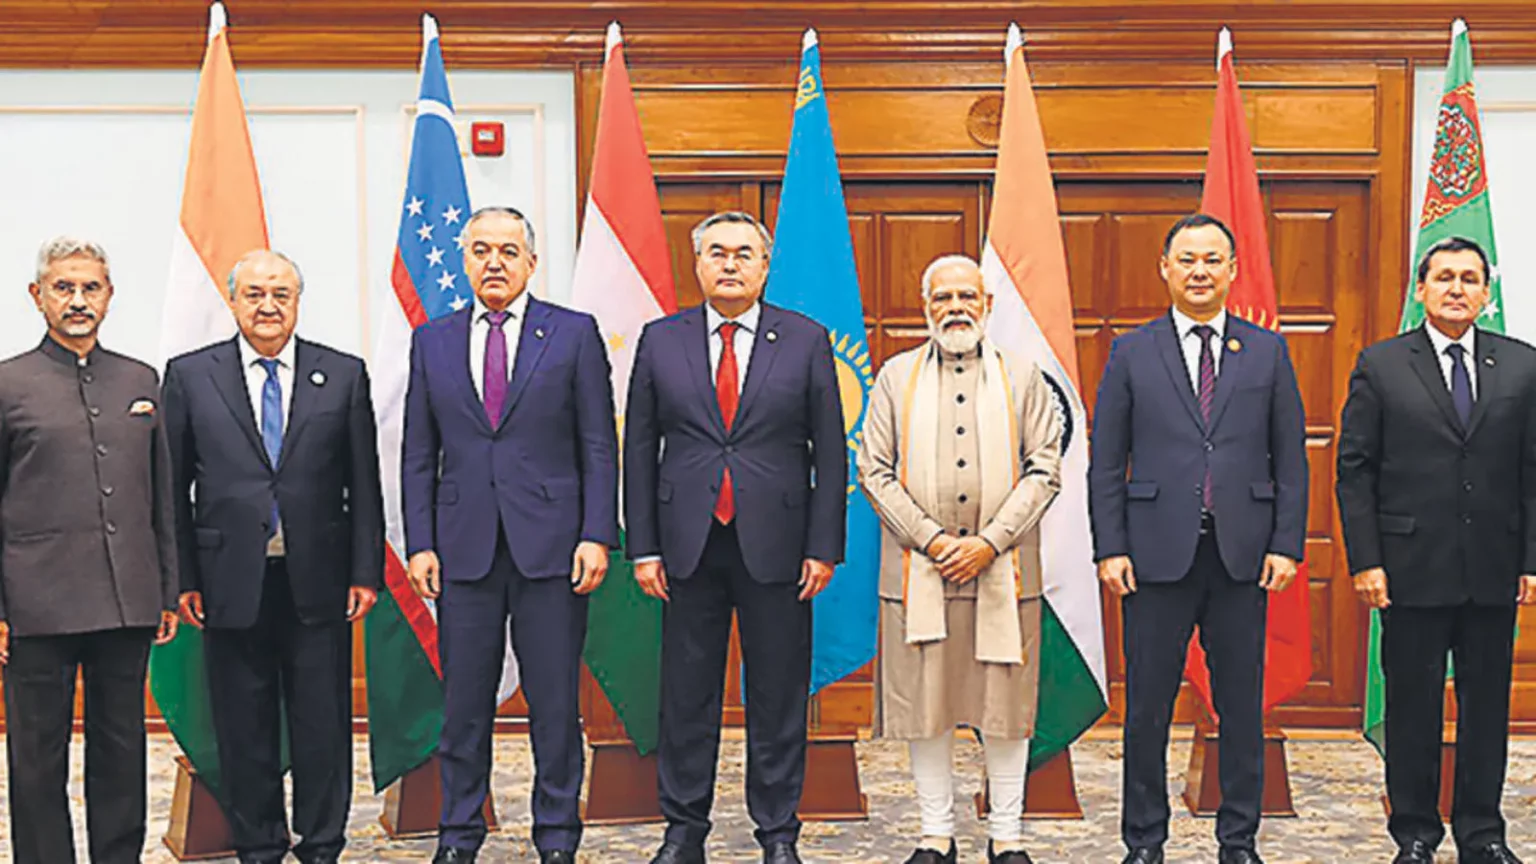 PM Modi meets leaders of 5 countries